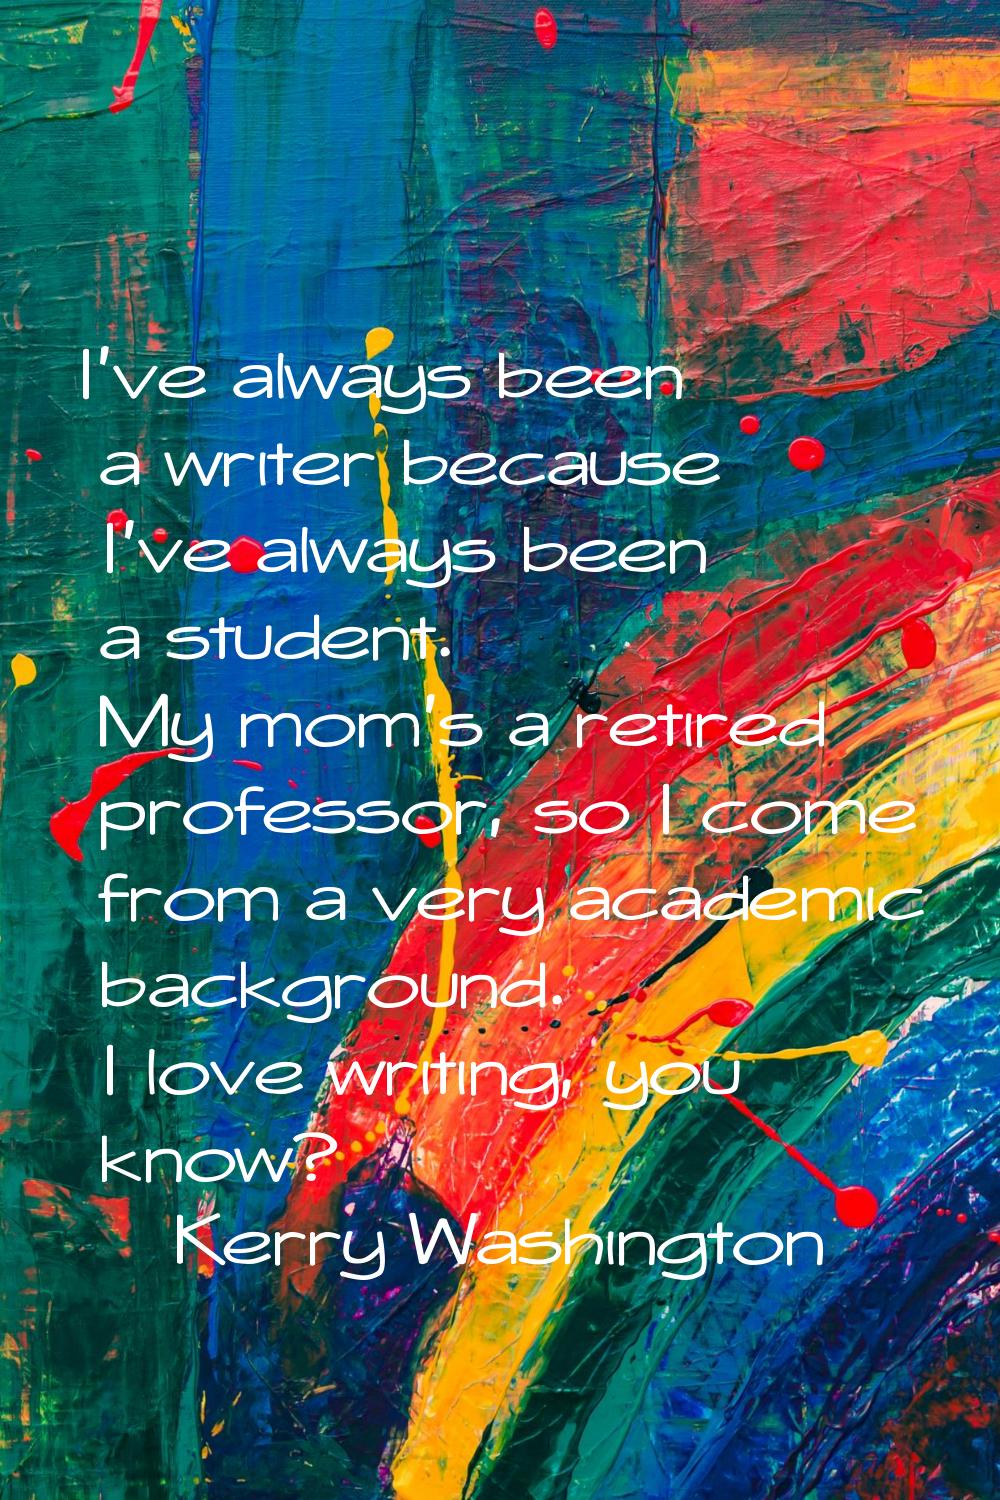 I've always been a writer because I've always been a student. My mom's a retired professor, so I co